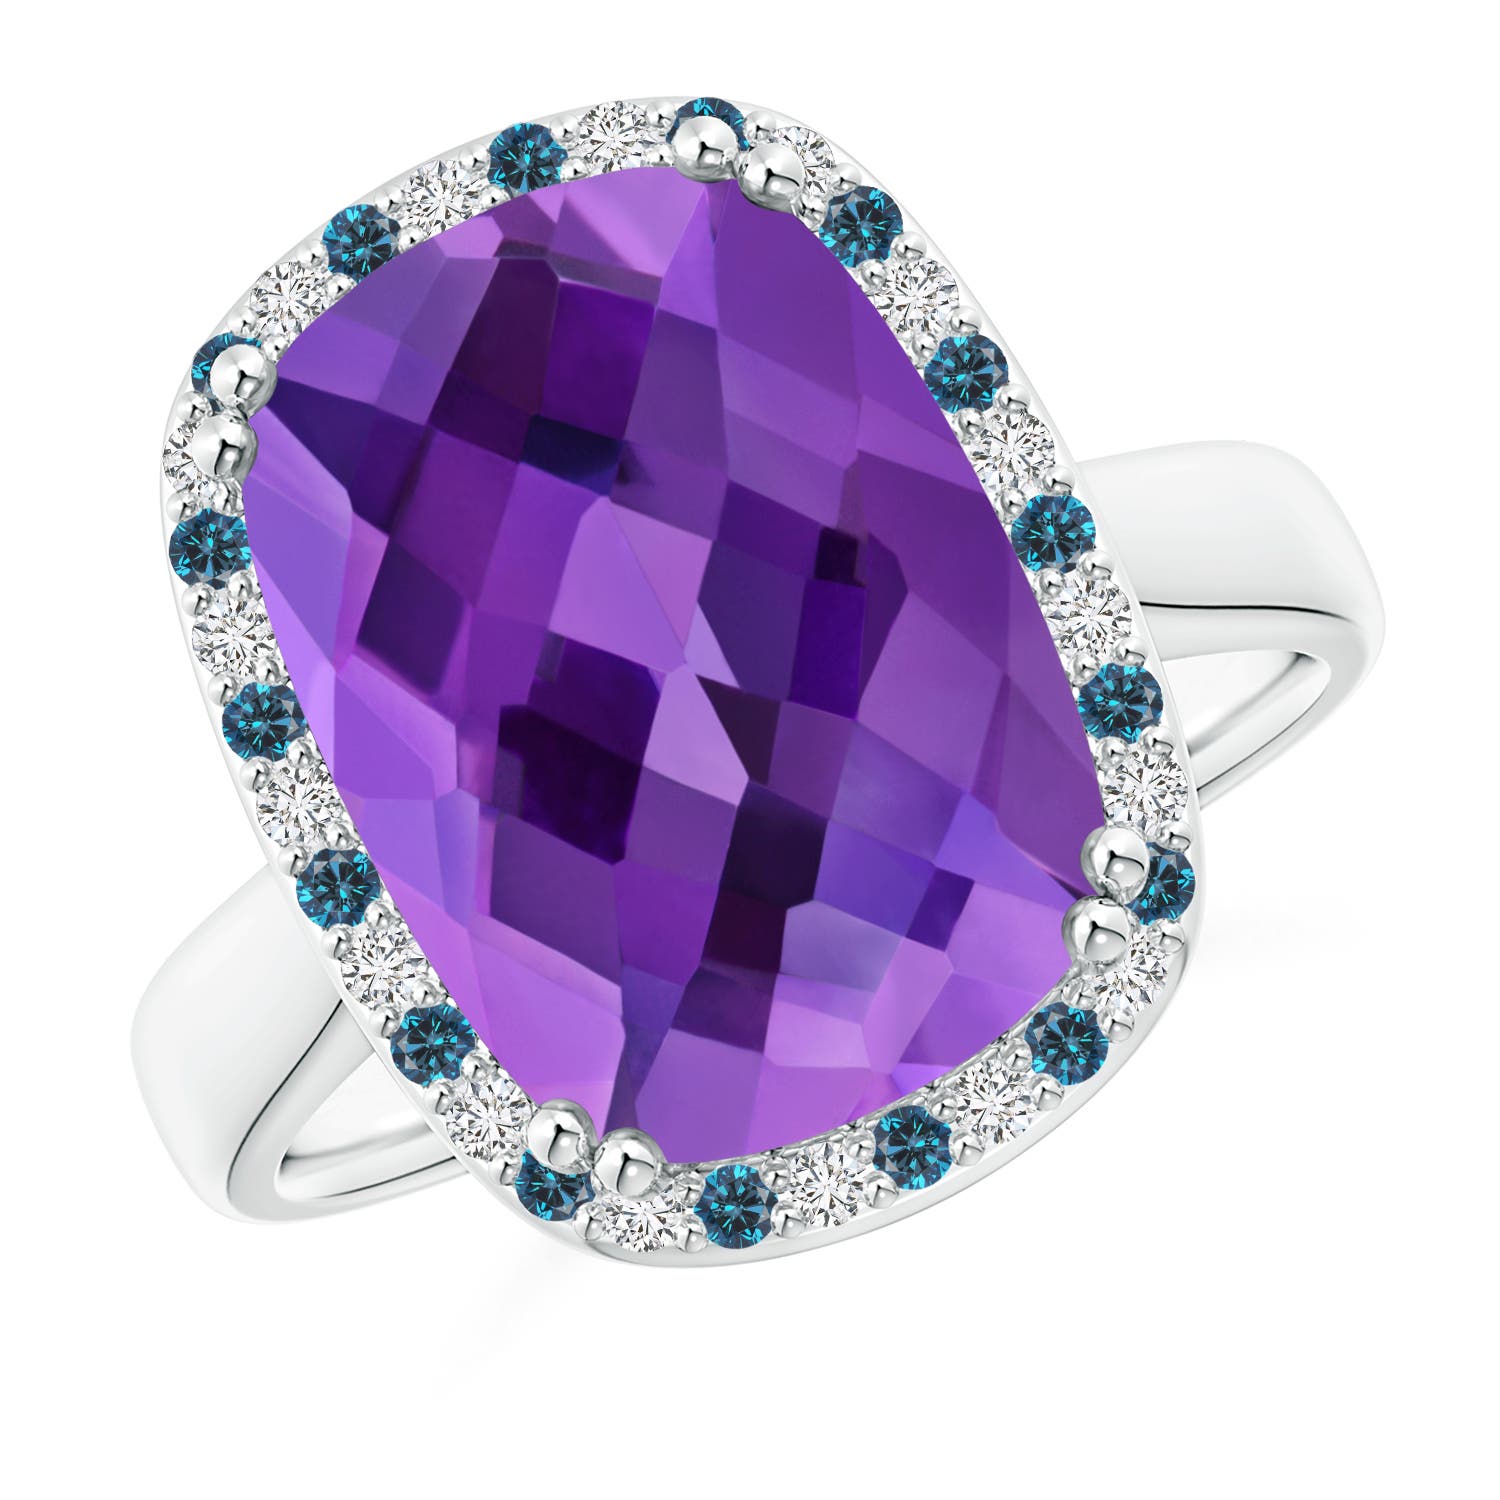 AAA - Amethyst / 6.27 CT / 14 KT White Gold